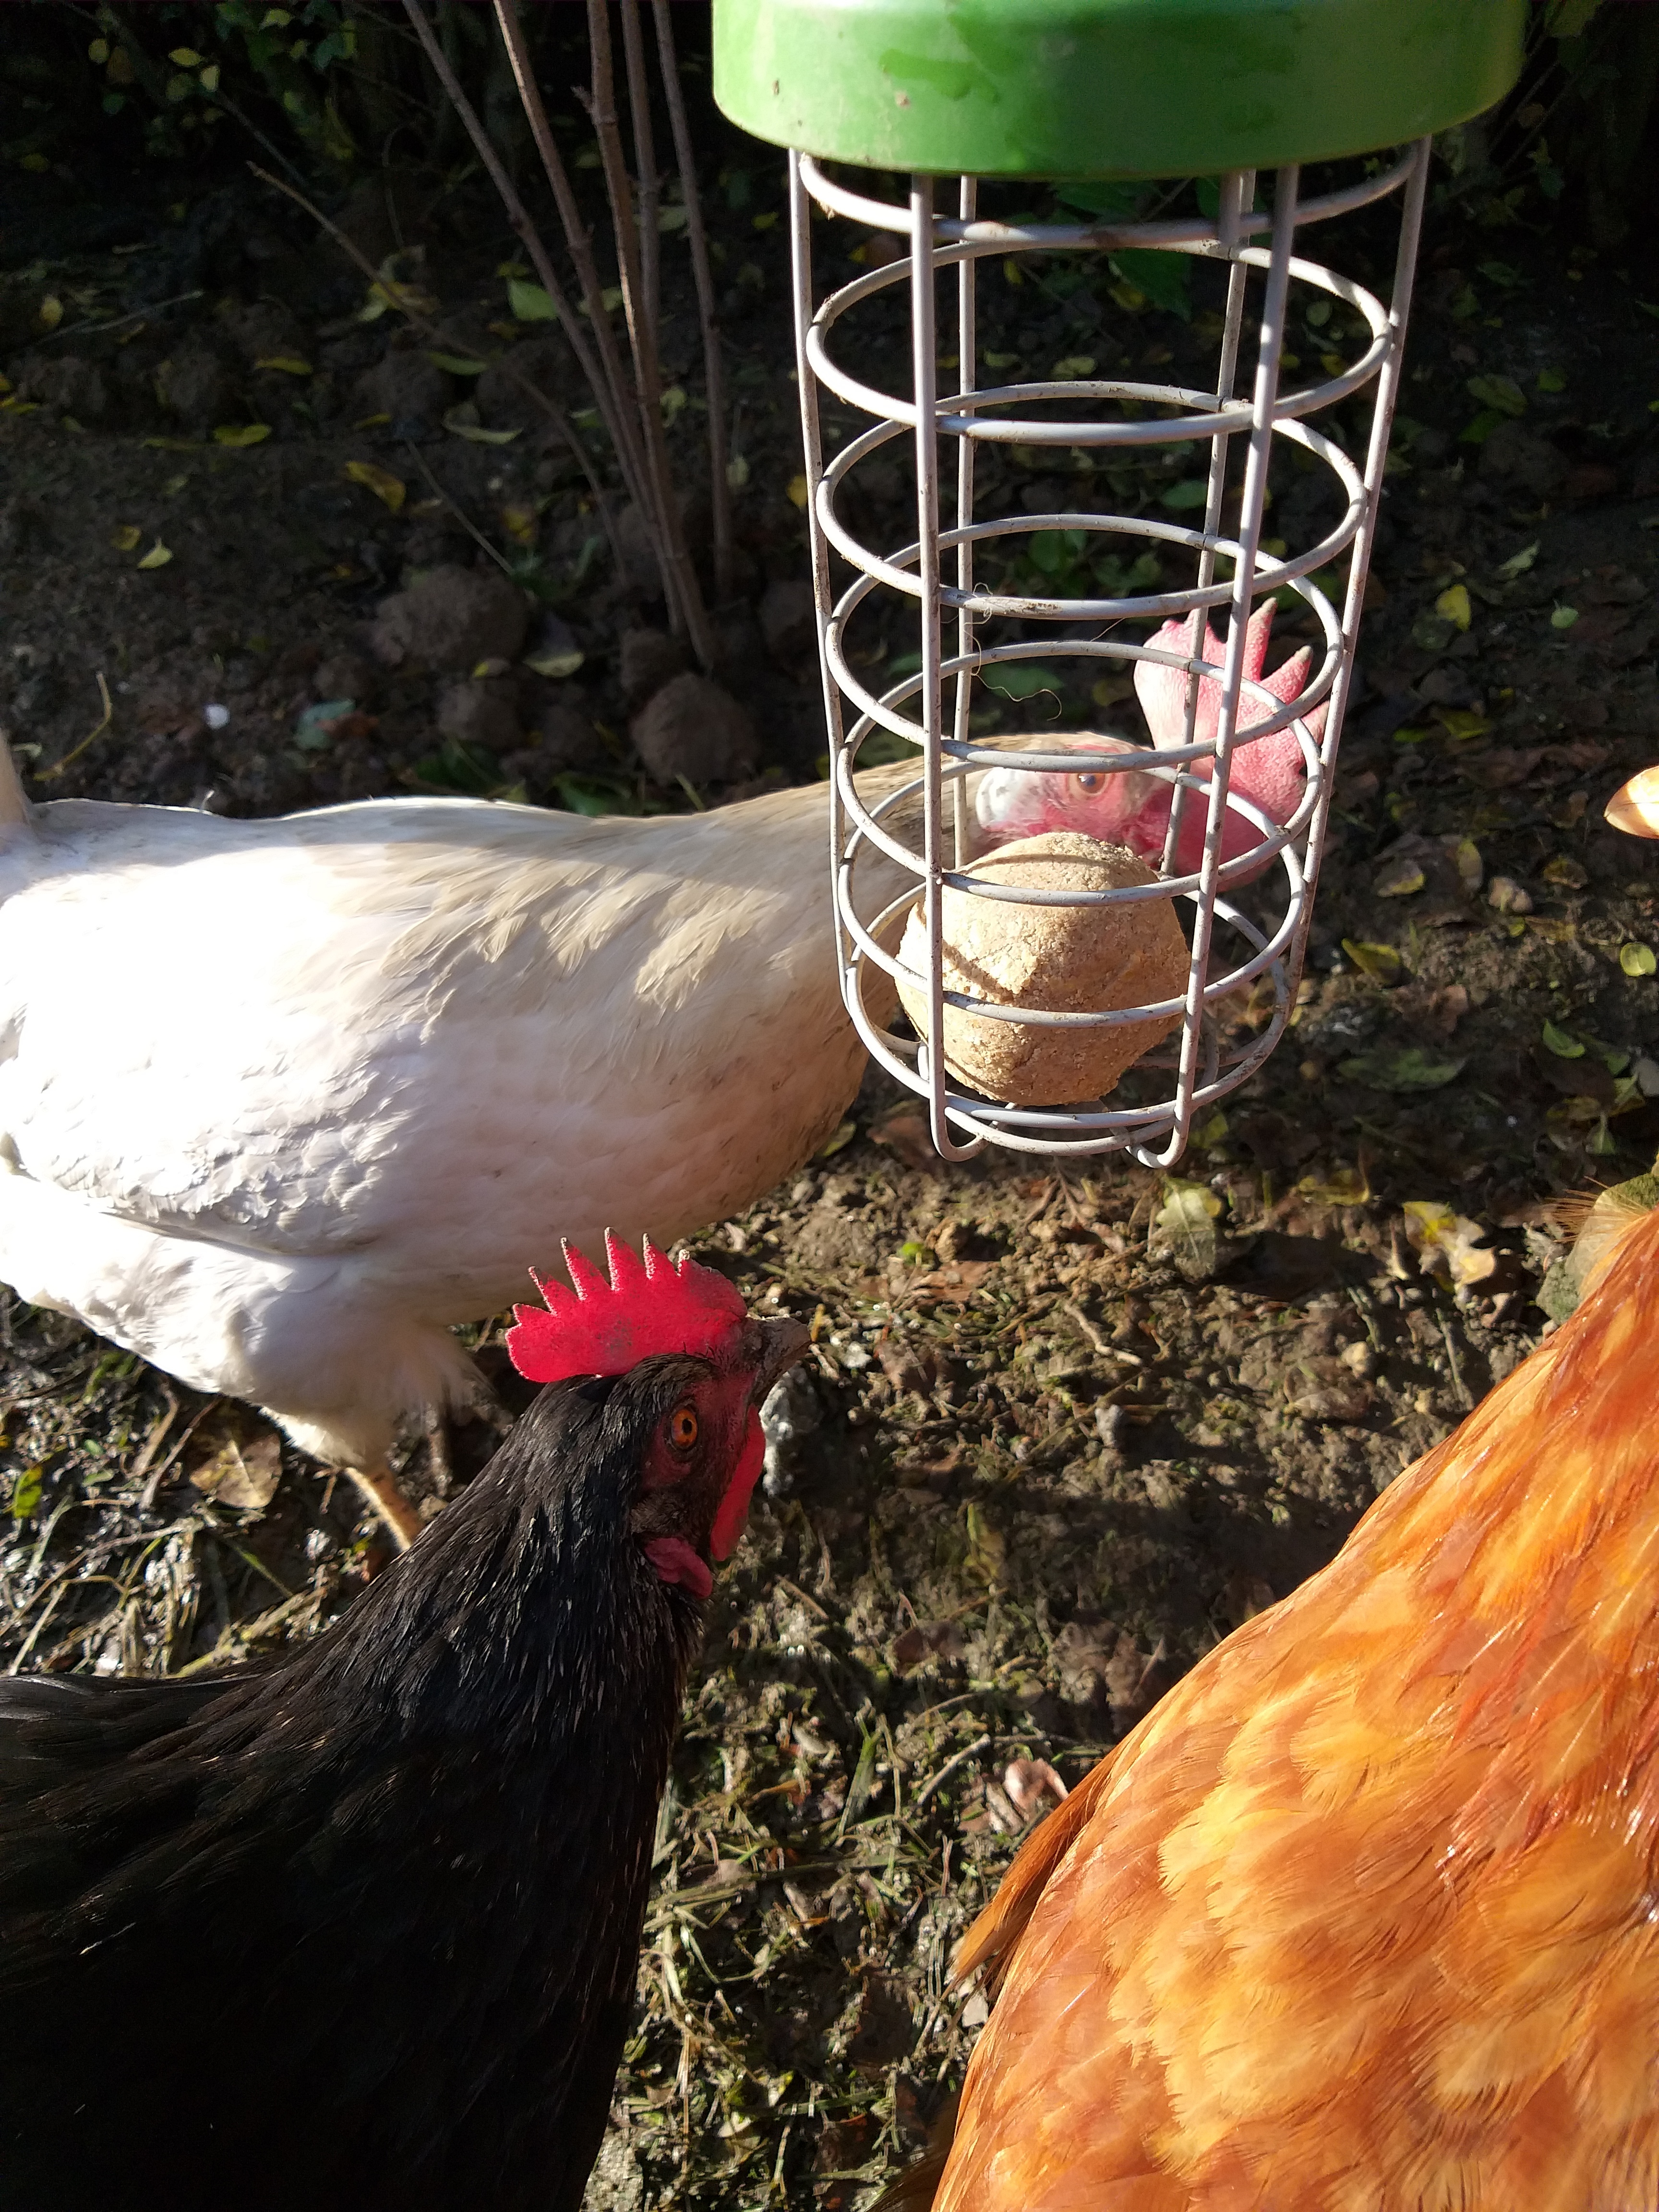 three chickens, one white, one black and one orange eating a nutrition ball from a treat caddi